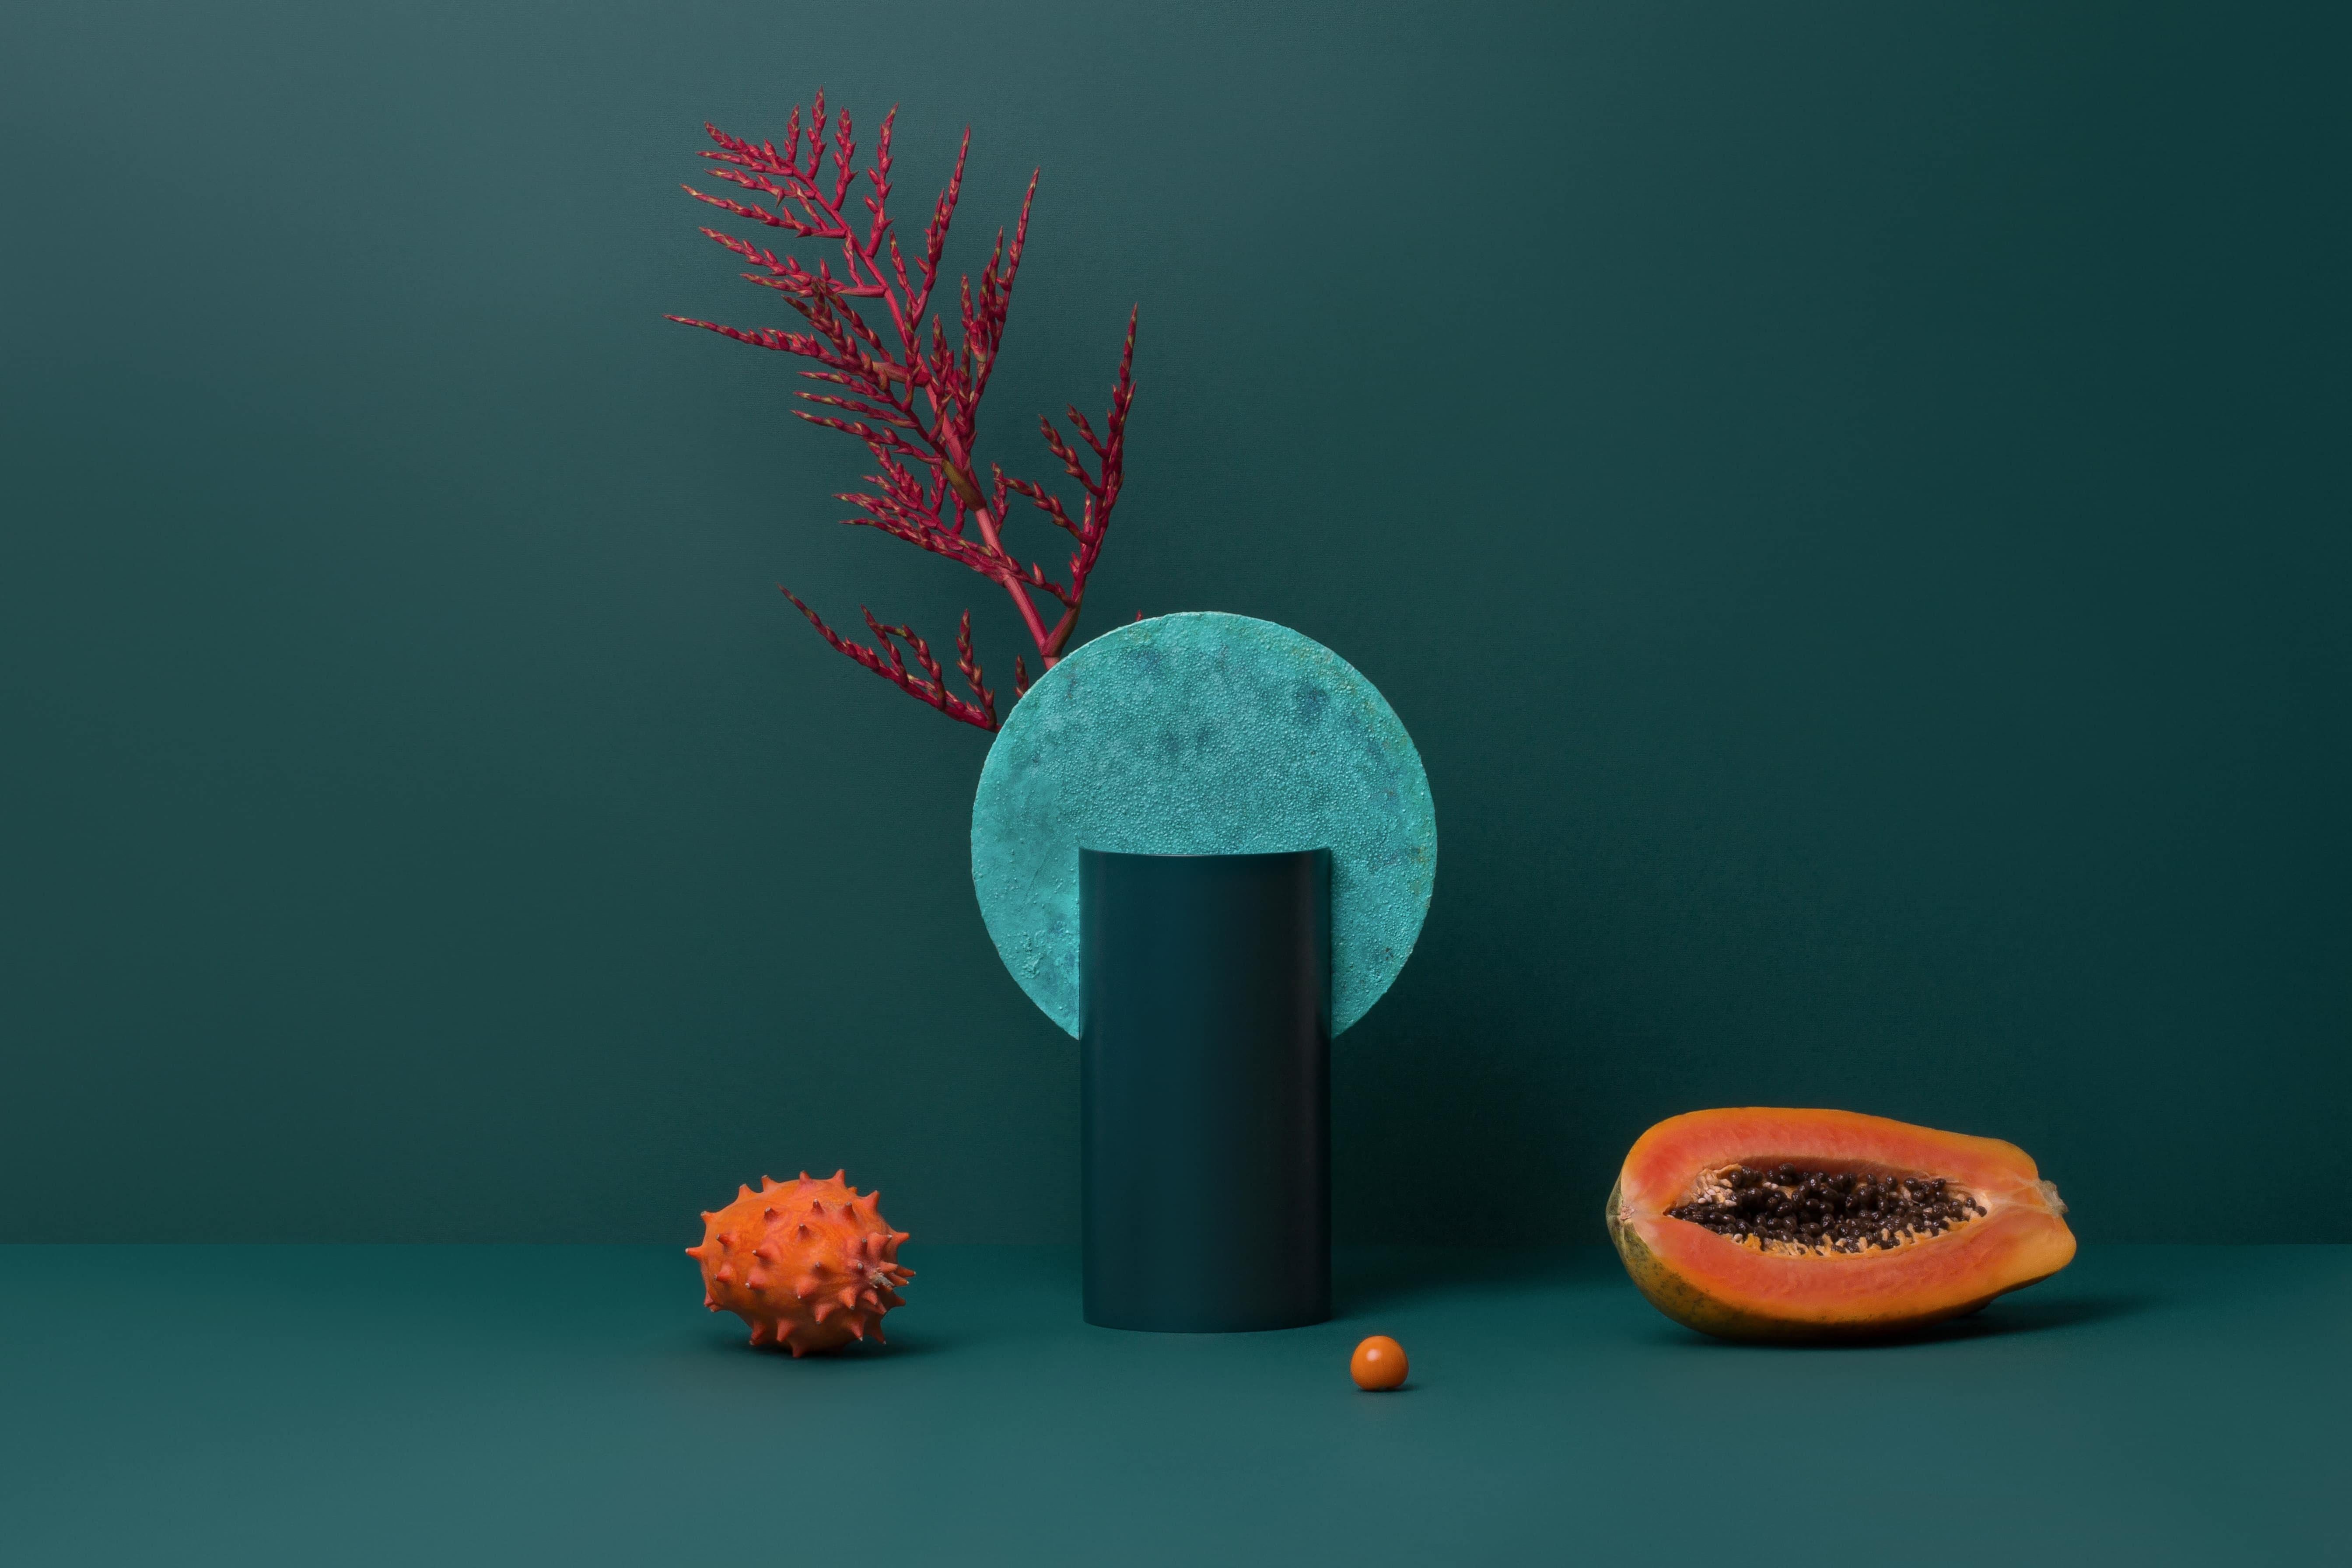 Ukrainian Limited Edition Modern Malevich Vase CSL2 by NOOM in Oxidized Copper and Steel